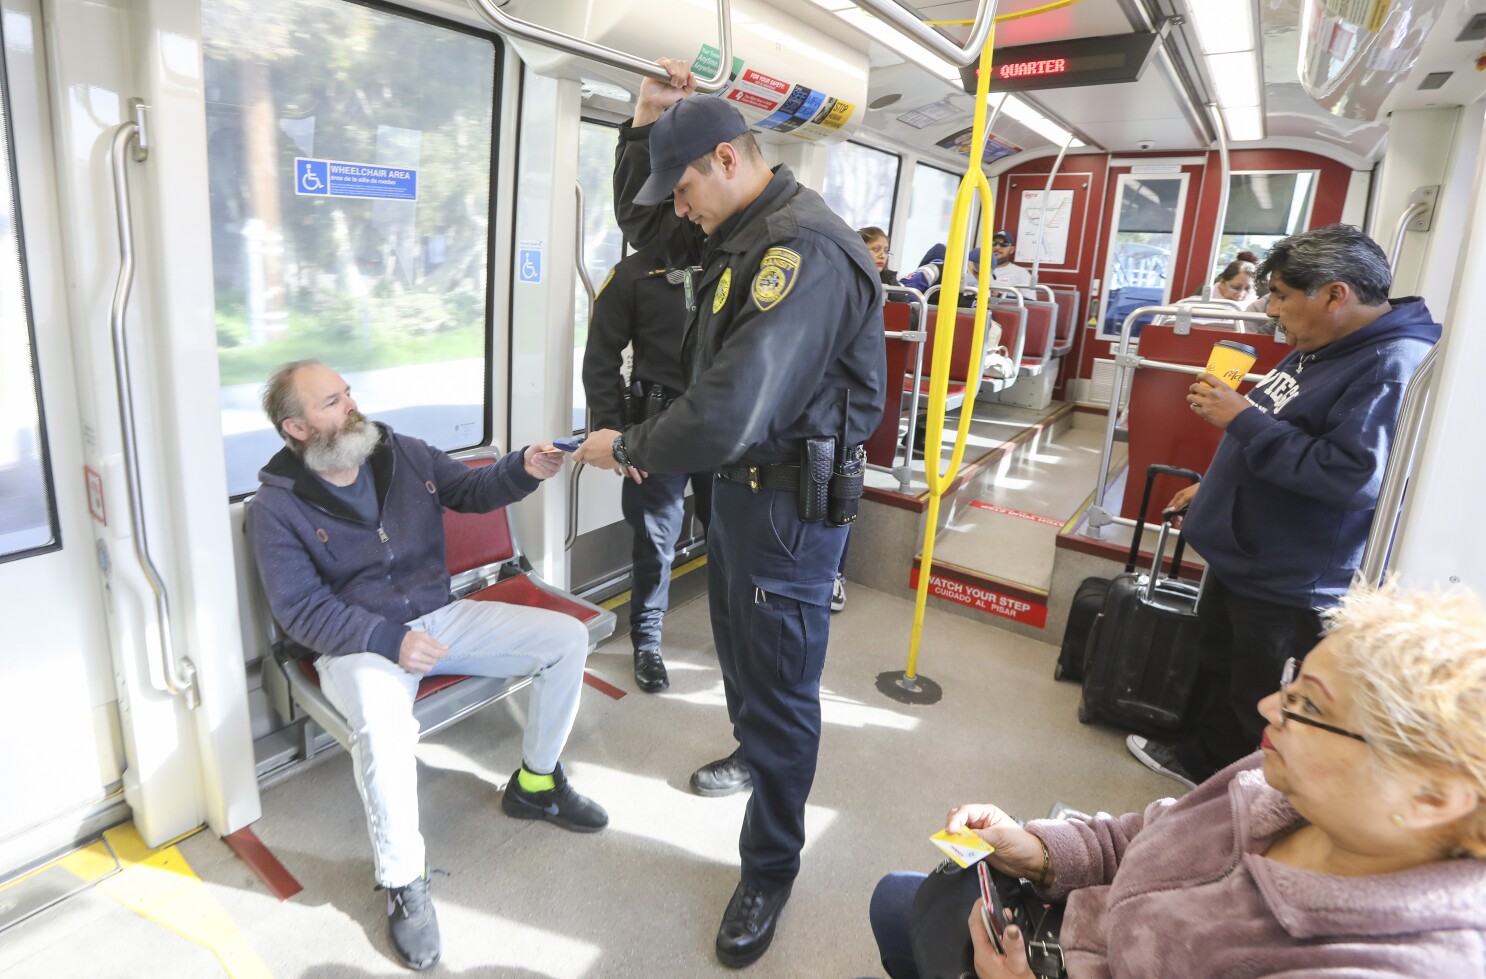 Mts Cracks Down On Trolley Riders Without Tickets Officials Raise Concerns About Criminalizing Poverty The San Diego Union Tribune